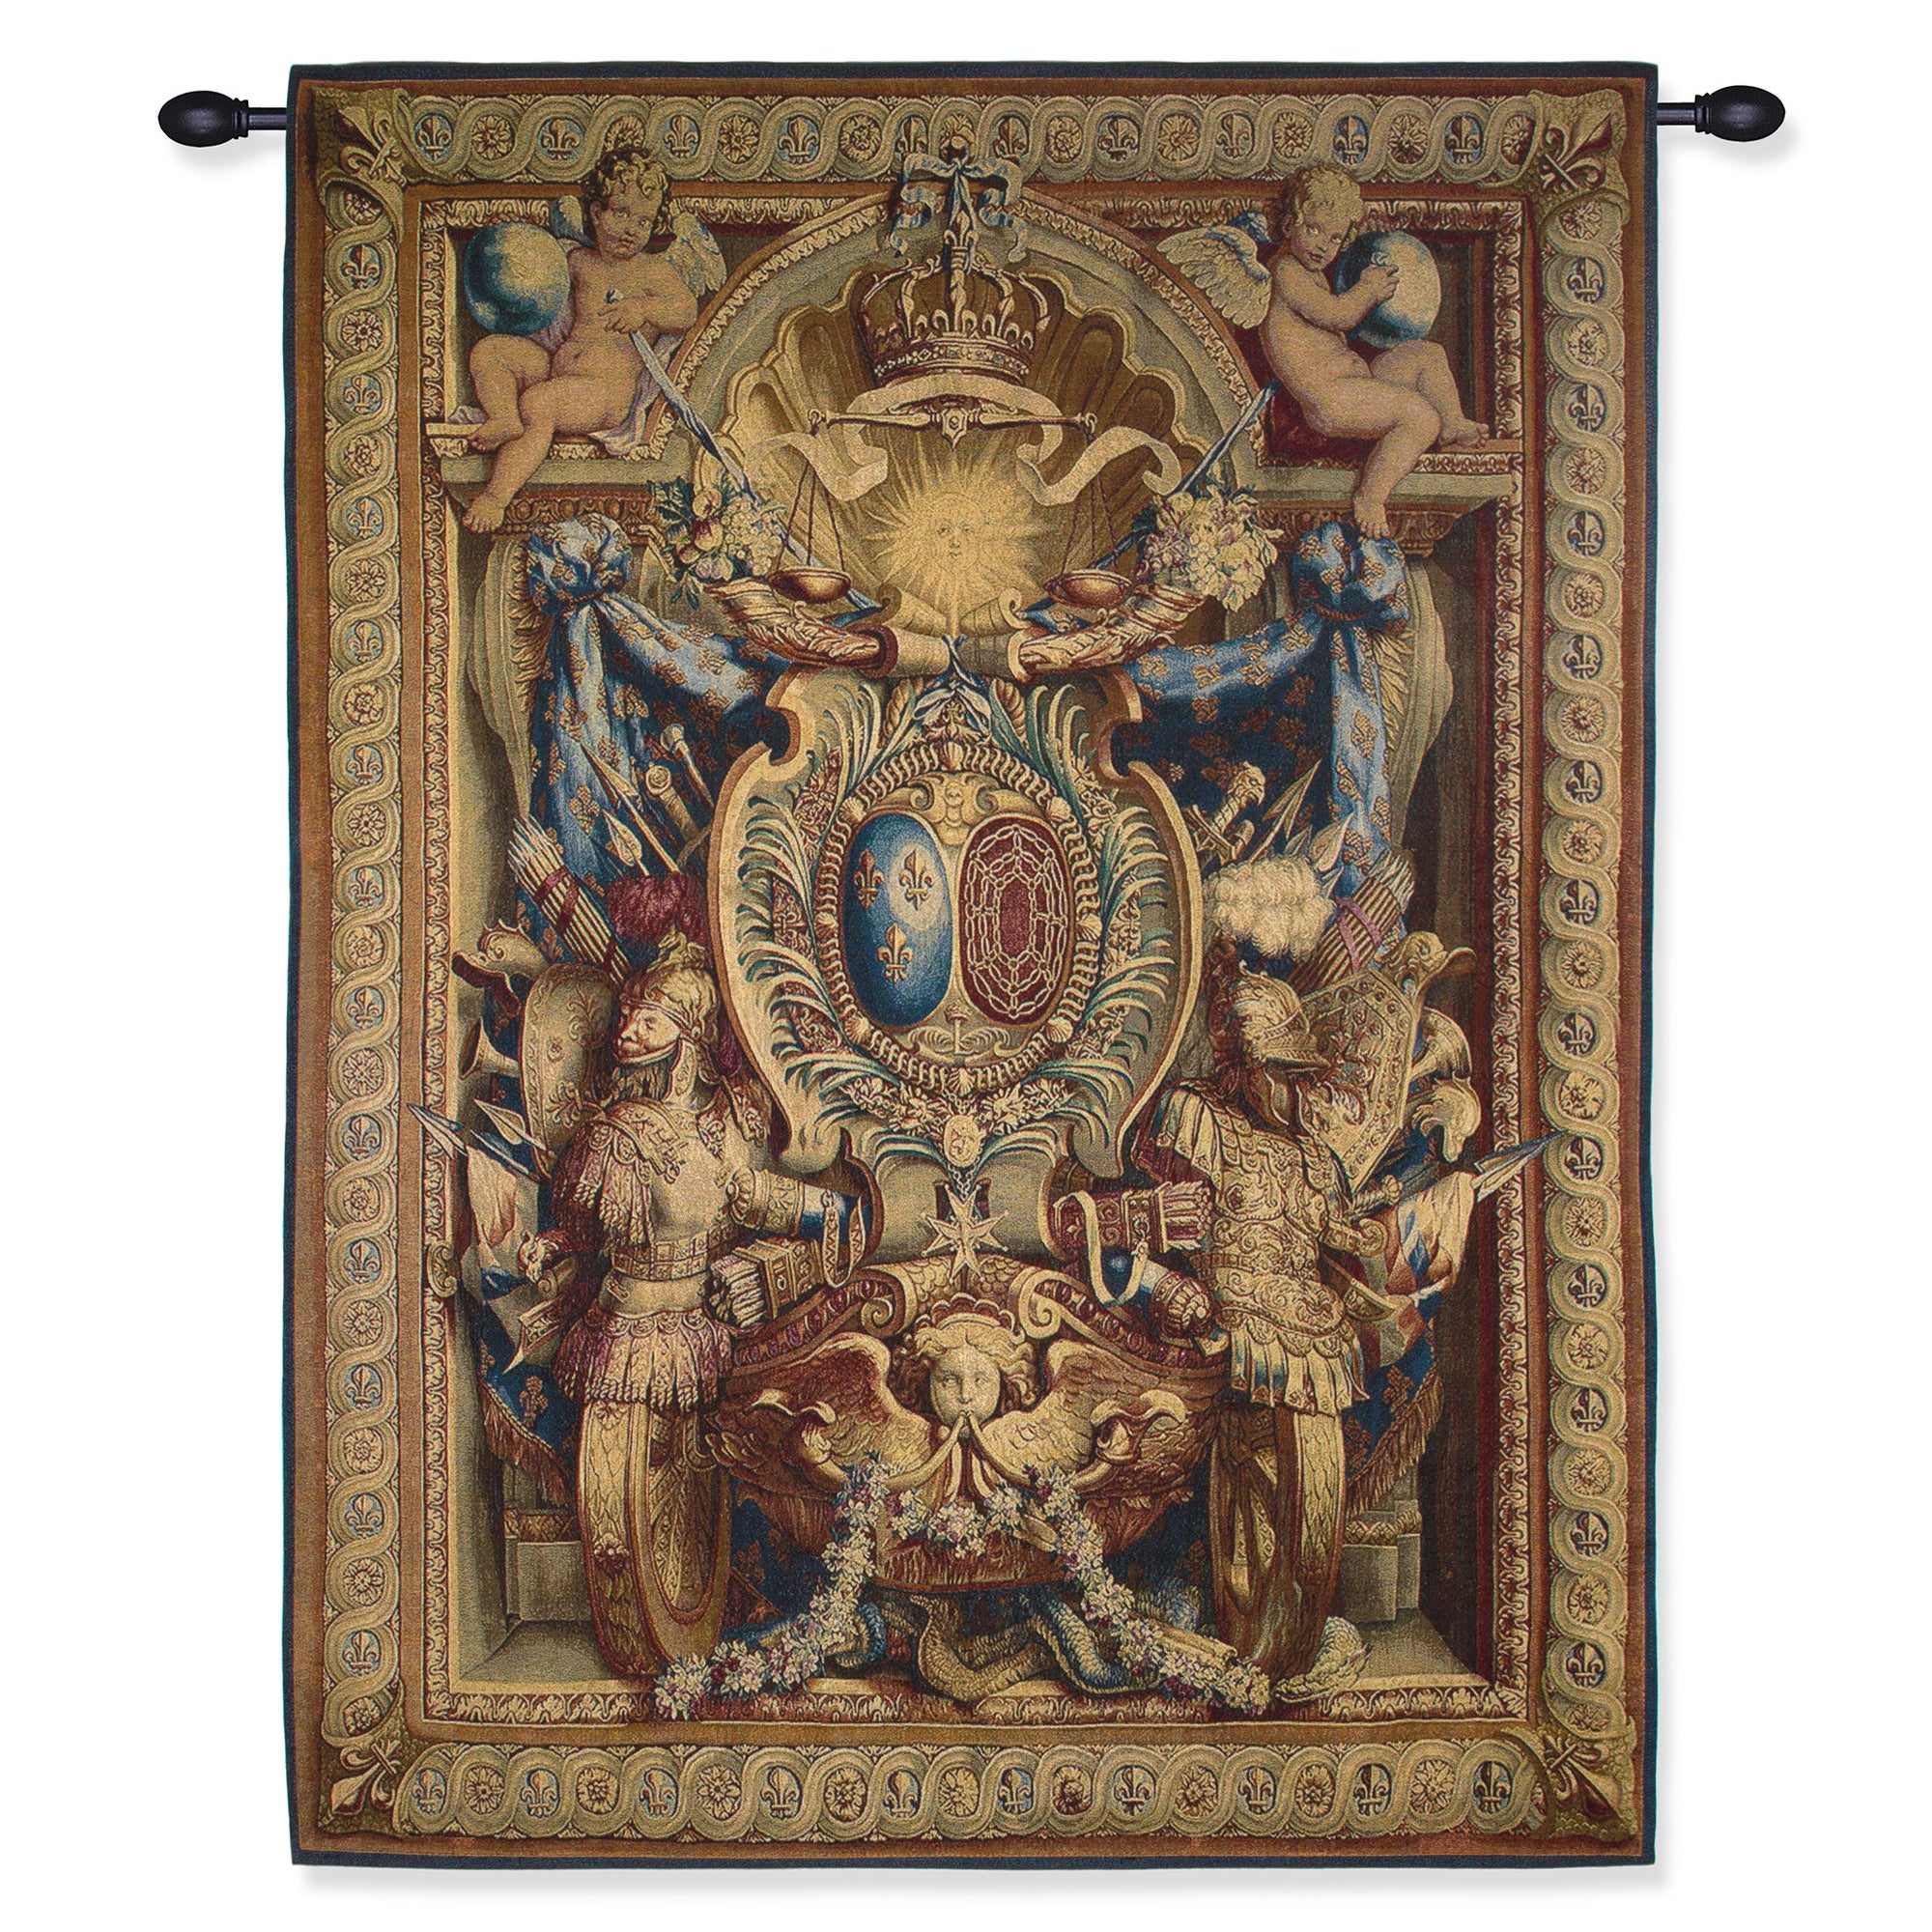 Portiere of the Chariot of Triumph-Tapestry Reproduction | Getty Store